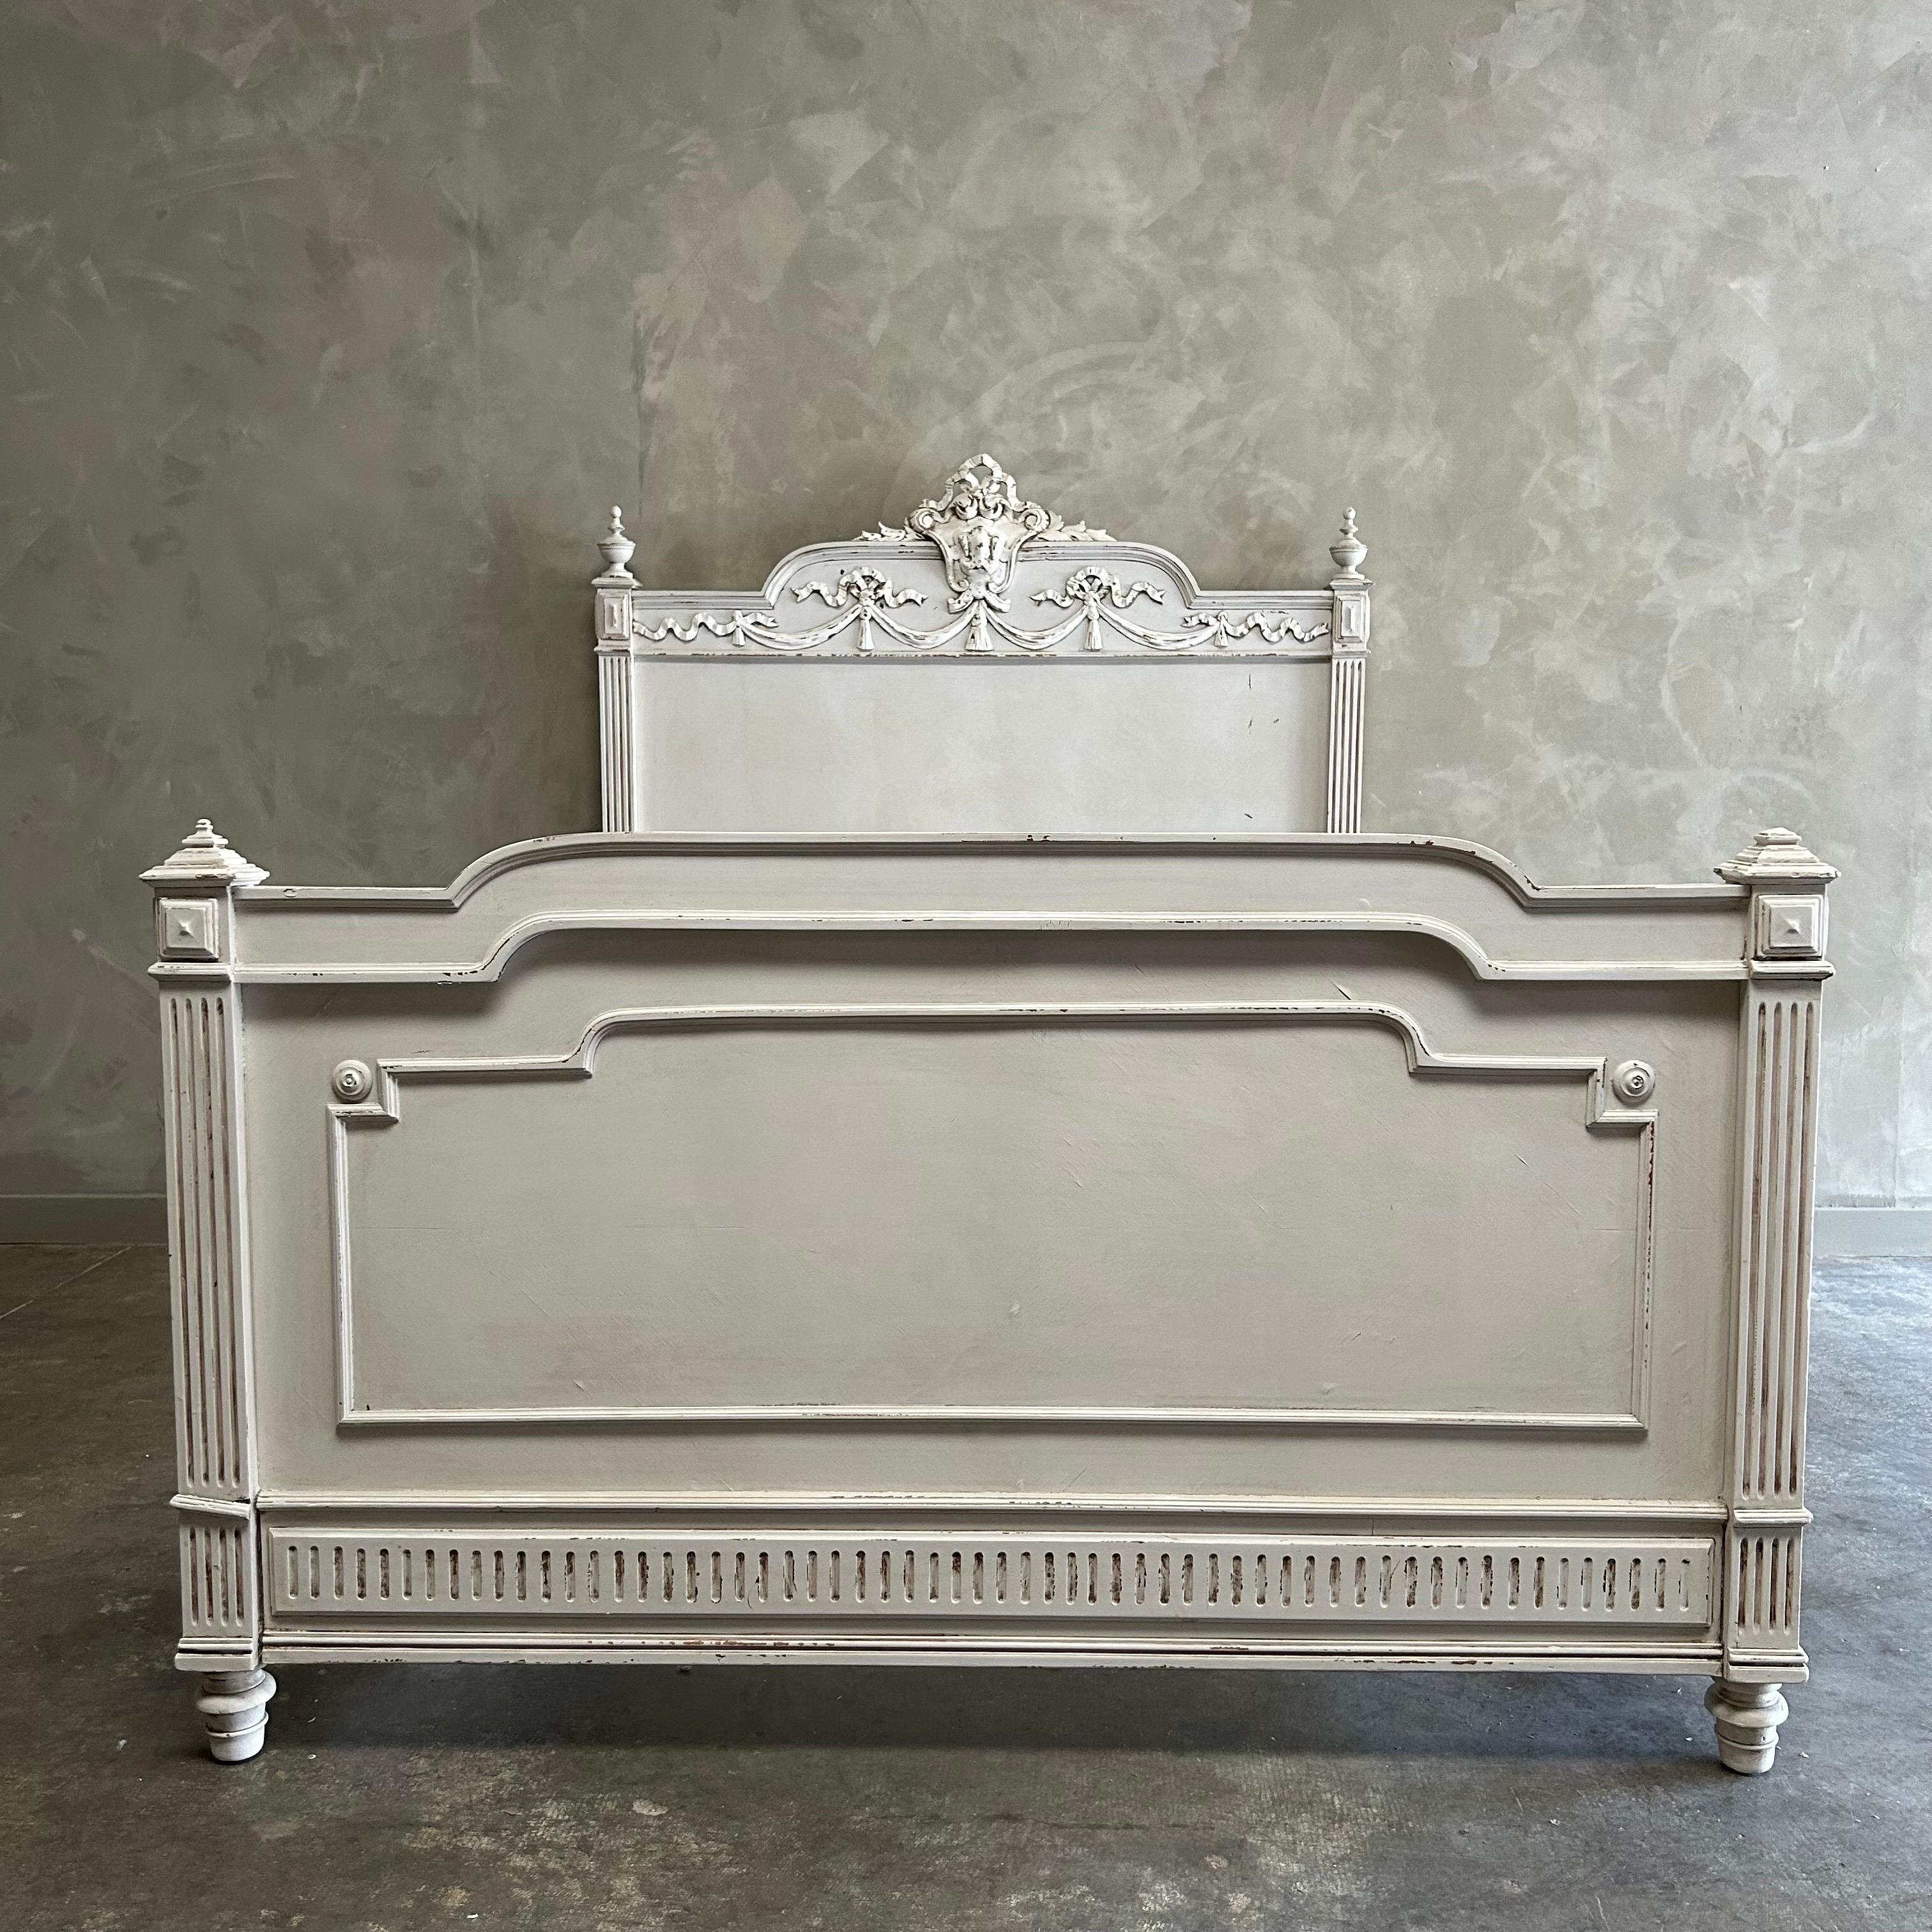 Antique French Louis XVI Style Painted Bed
Total dimensions:(assembled) 55”w x 78”d x 58”h
Footboard Height: 32”h
Inside rail dimensions: 51”w x 74”d
Can be used with a US full size mattress.  Custom slats would need to be made so that the mattress